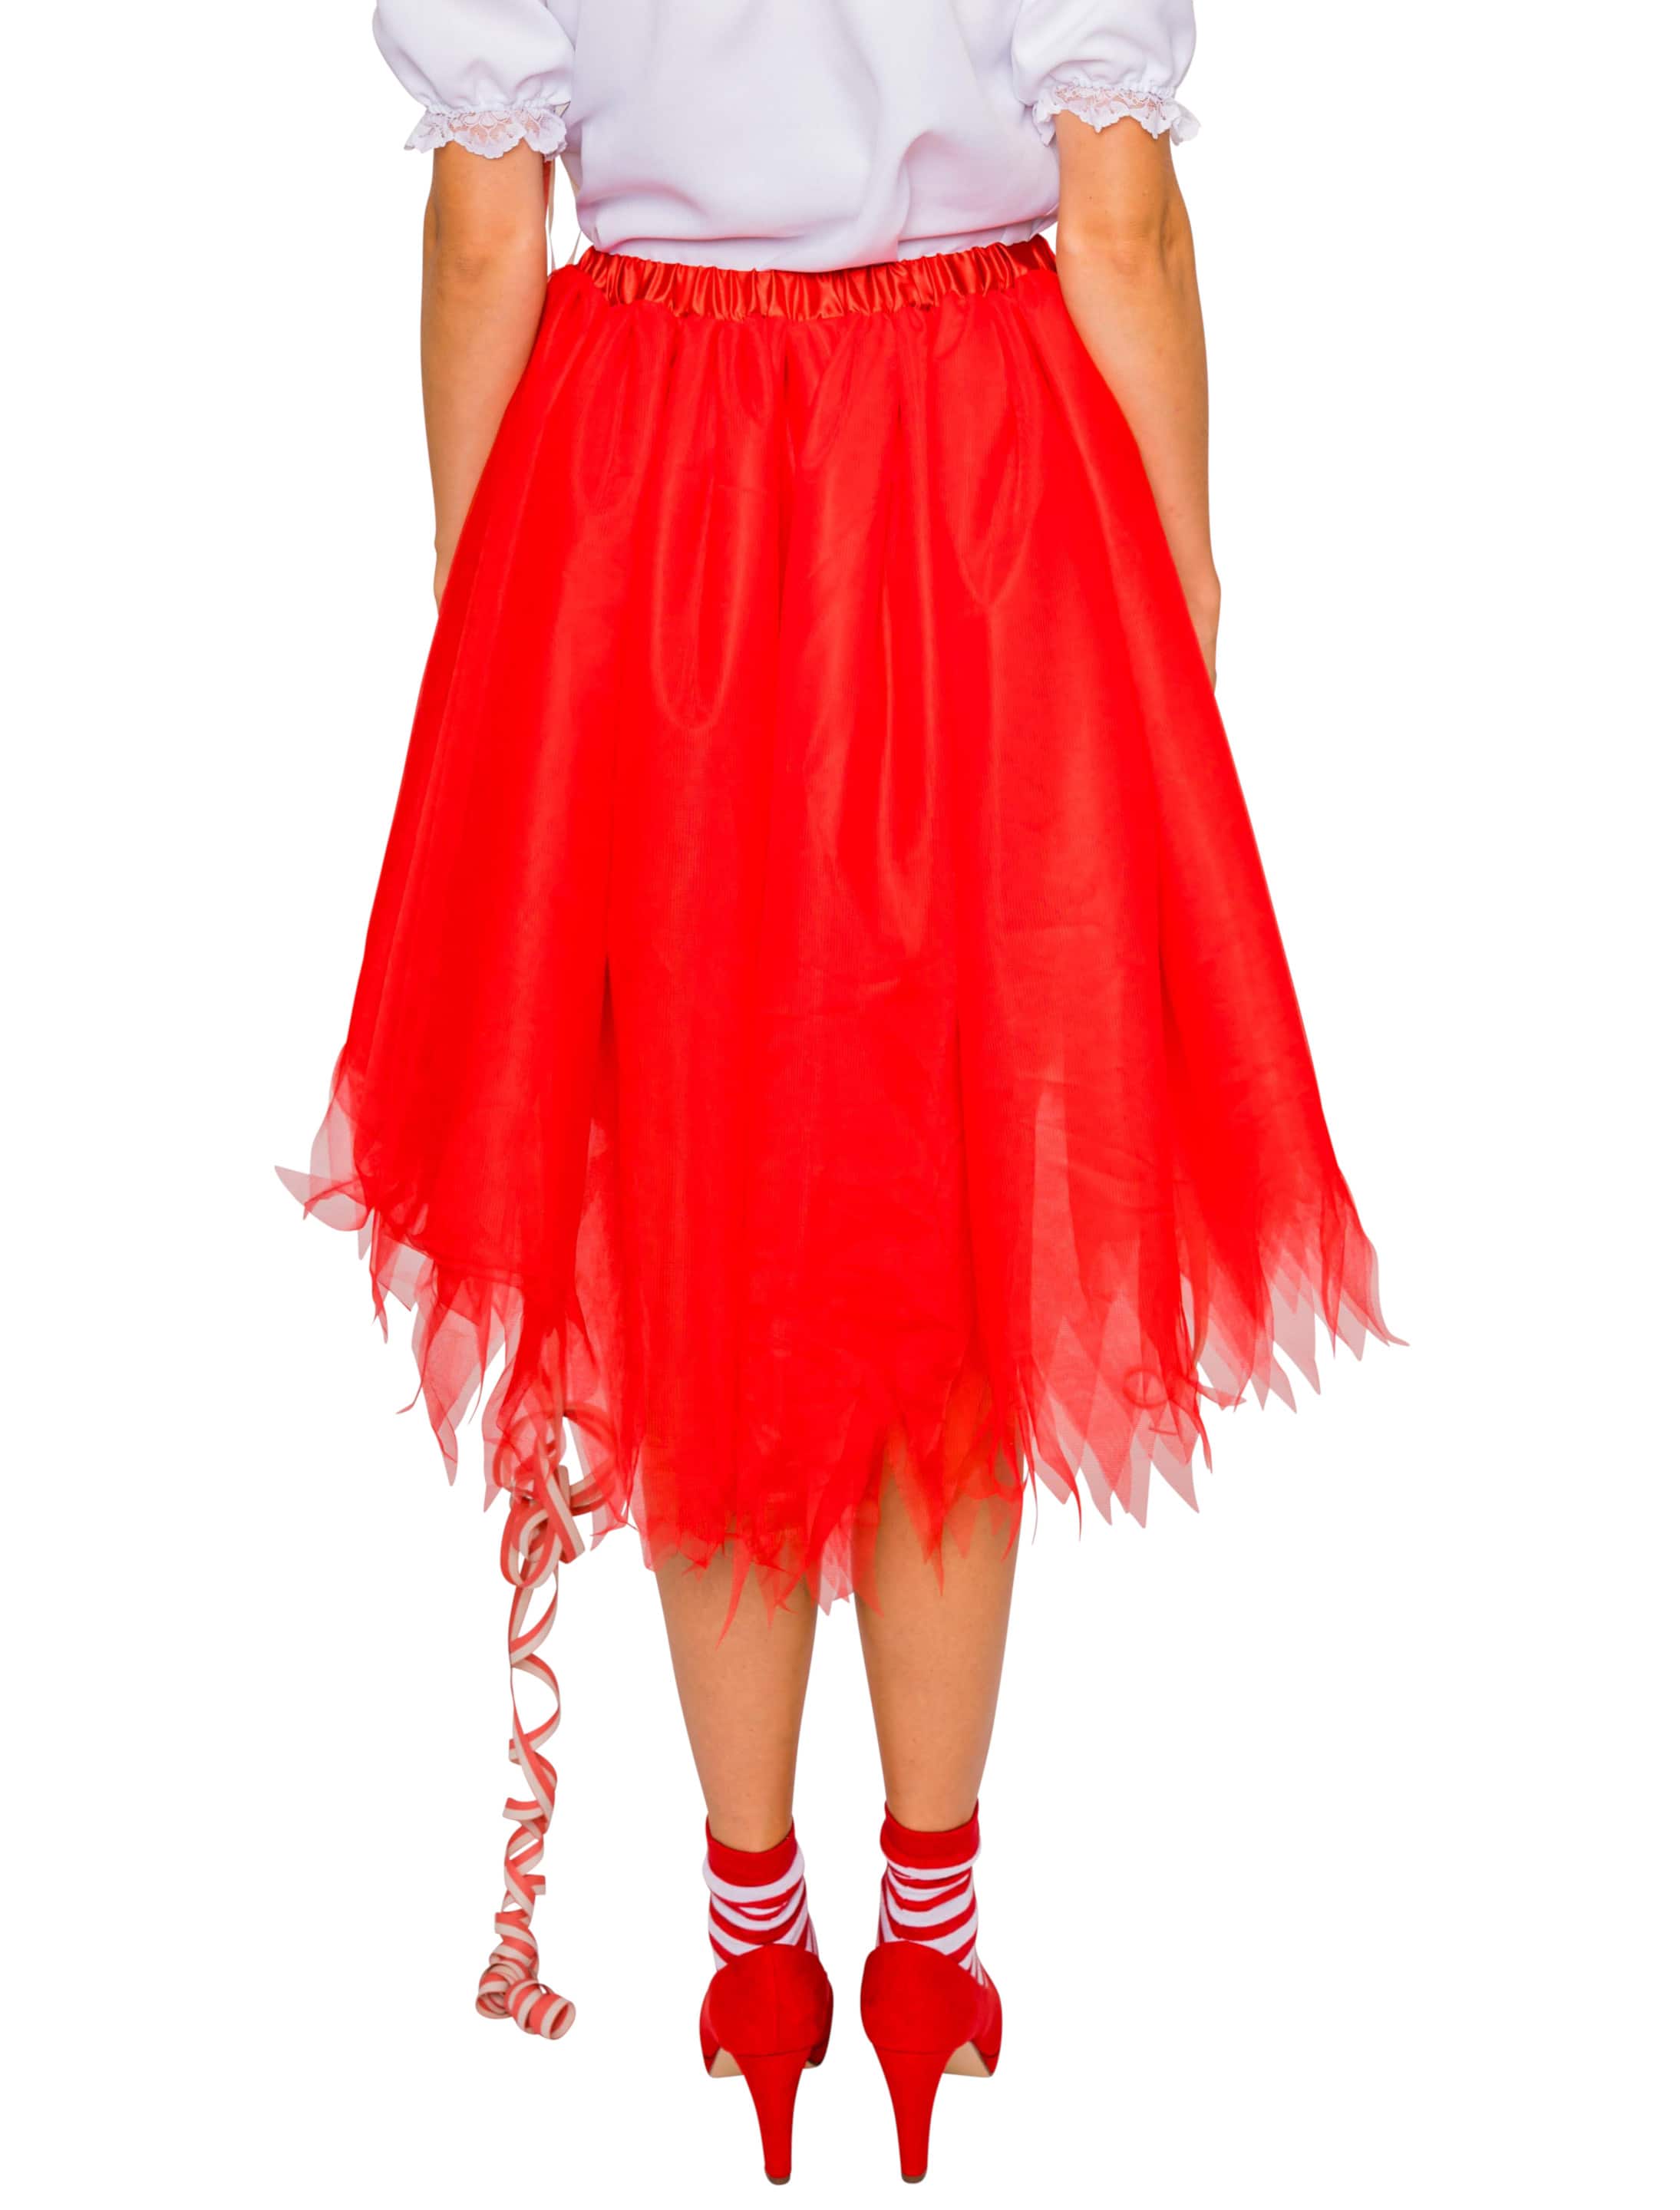 Petticoat deluxe rot one size